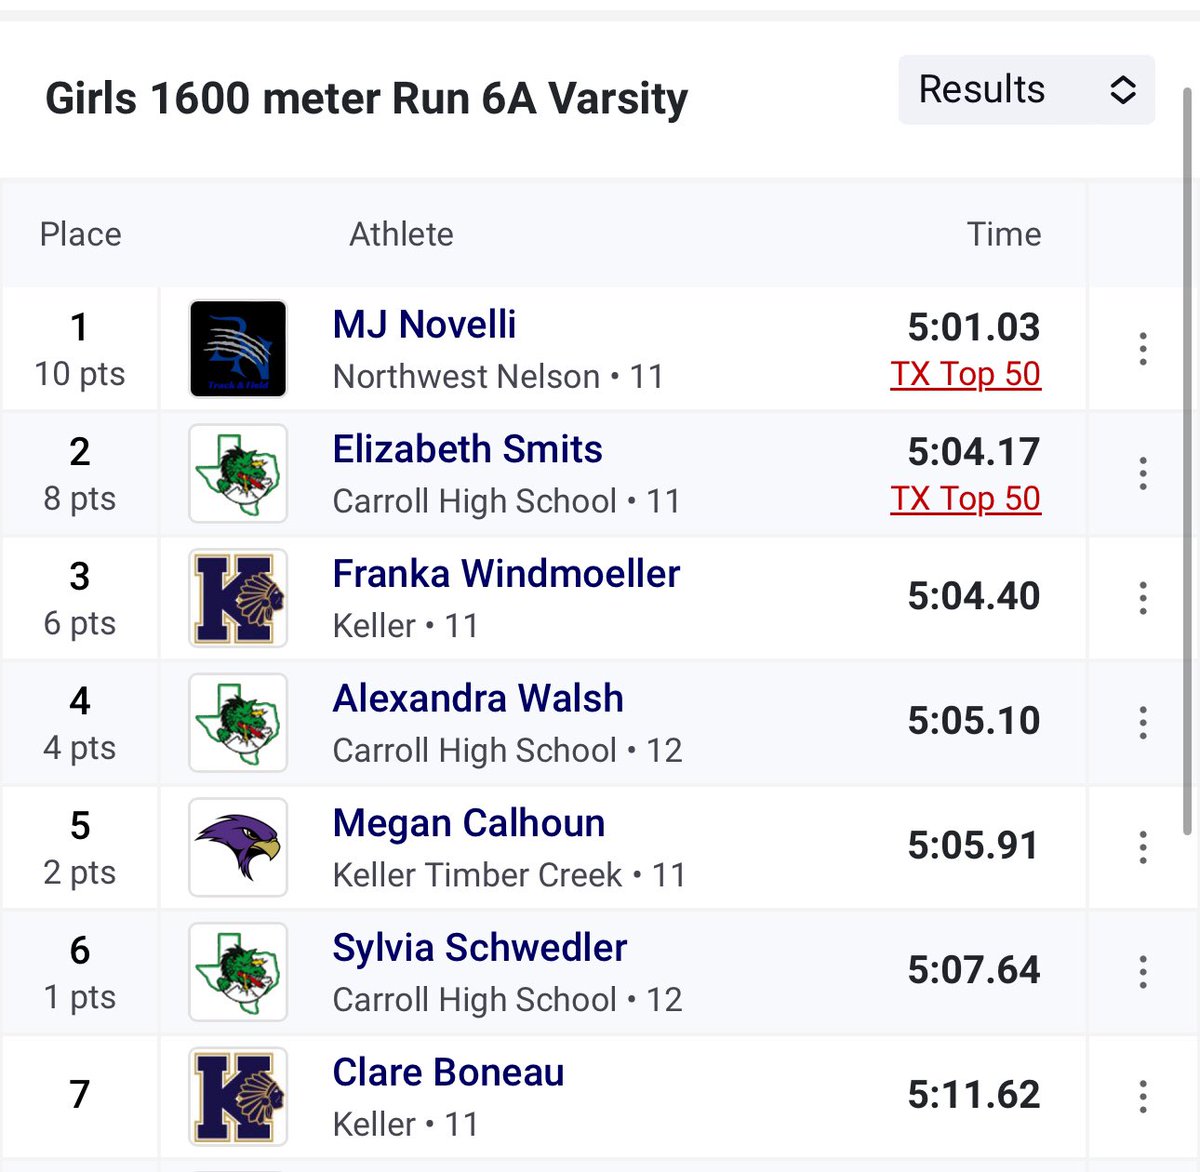 Congratulations to Elizabeth Smits (2nd place), Alexandra Walsh (4th place) & Sylvia Schwedler (6th place) on their District 4-6a Varsity 1600 meter performances. Elizabeth & Alexandra have advanced to next Thursday’s Area Meet.